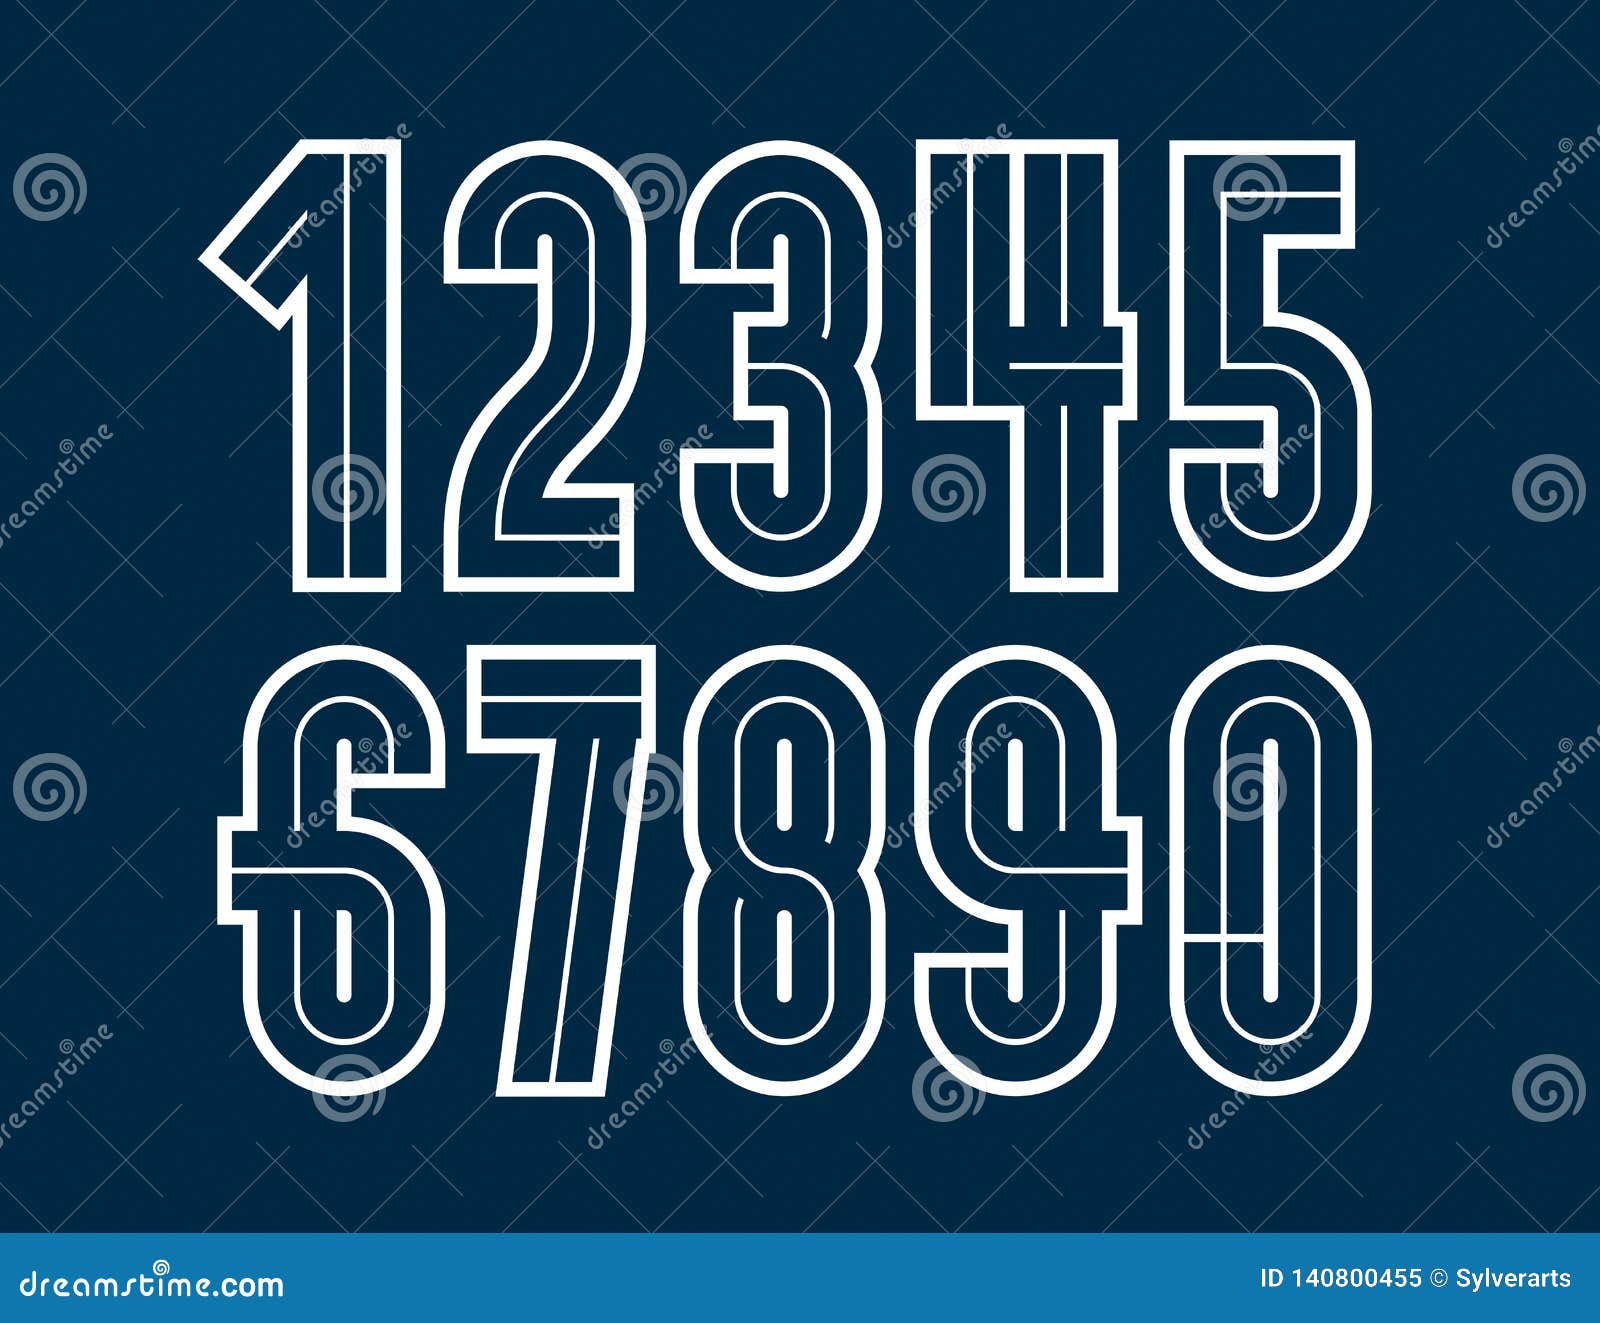 Download Vector Retro Regular Numbers Collection For Use In Logo ...